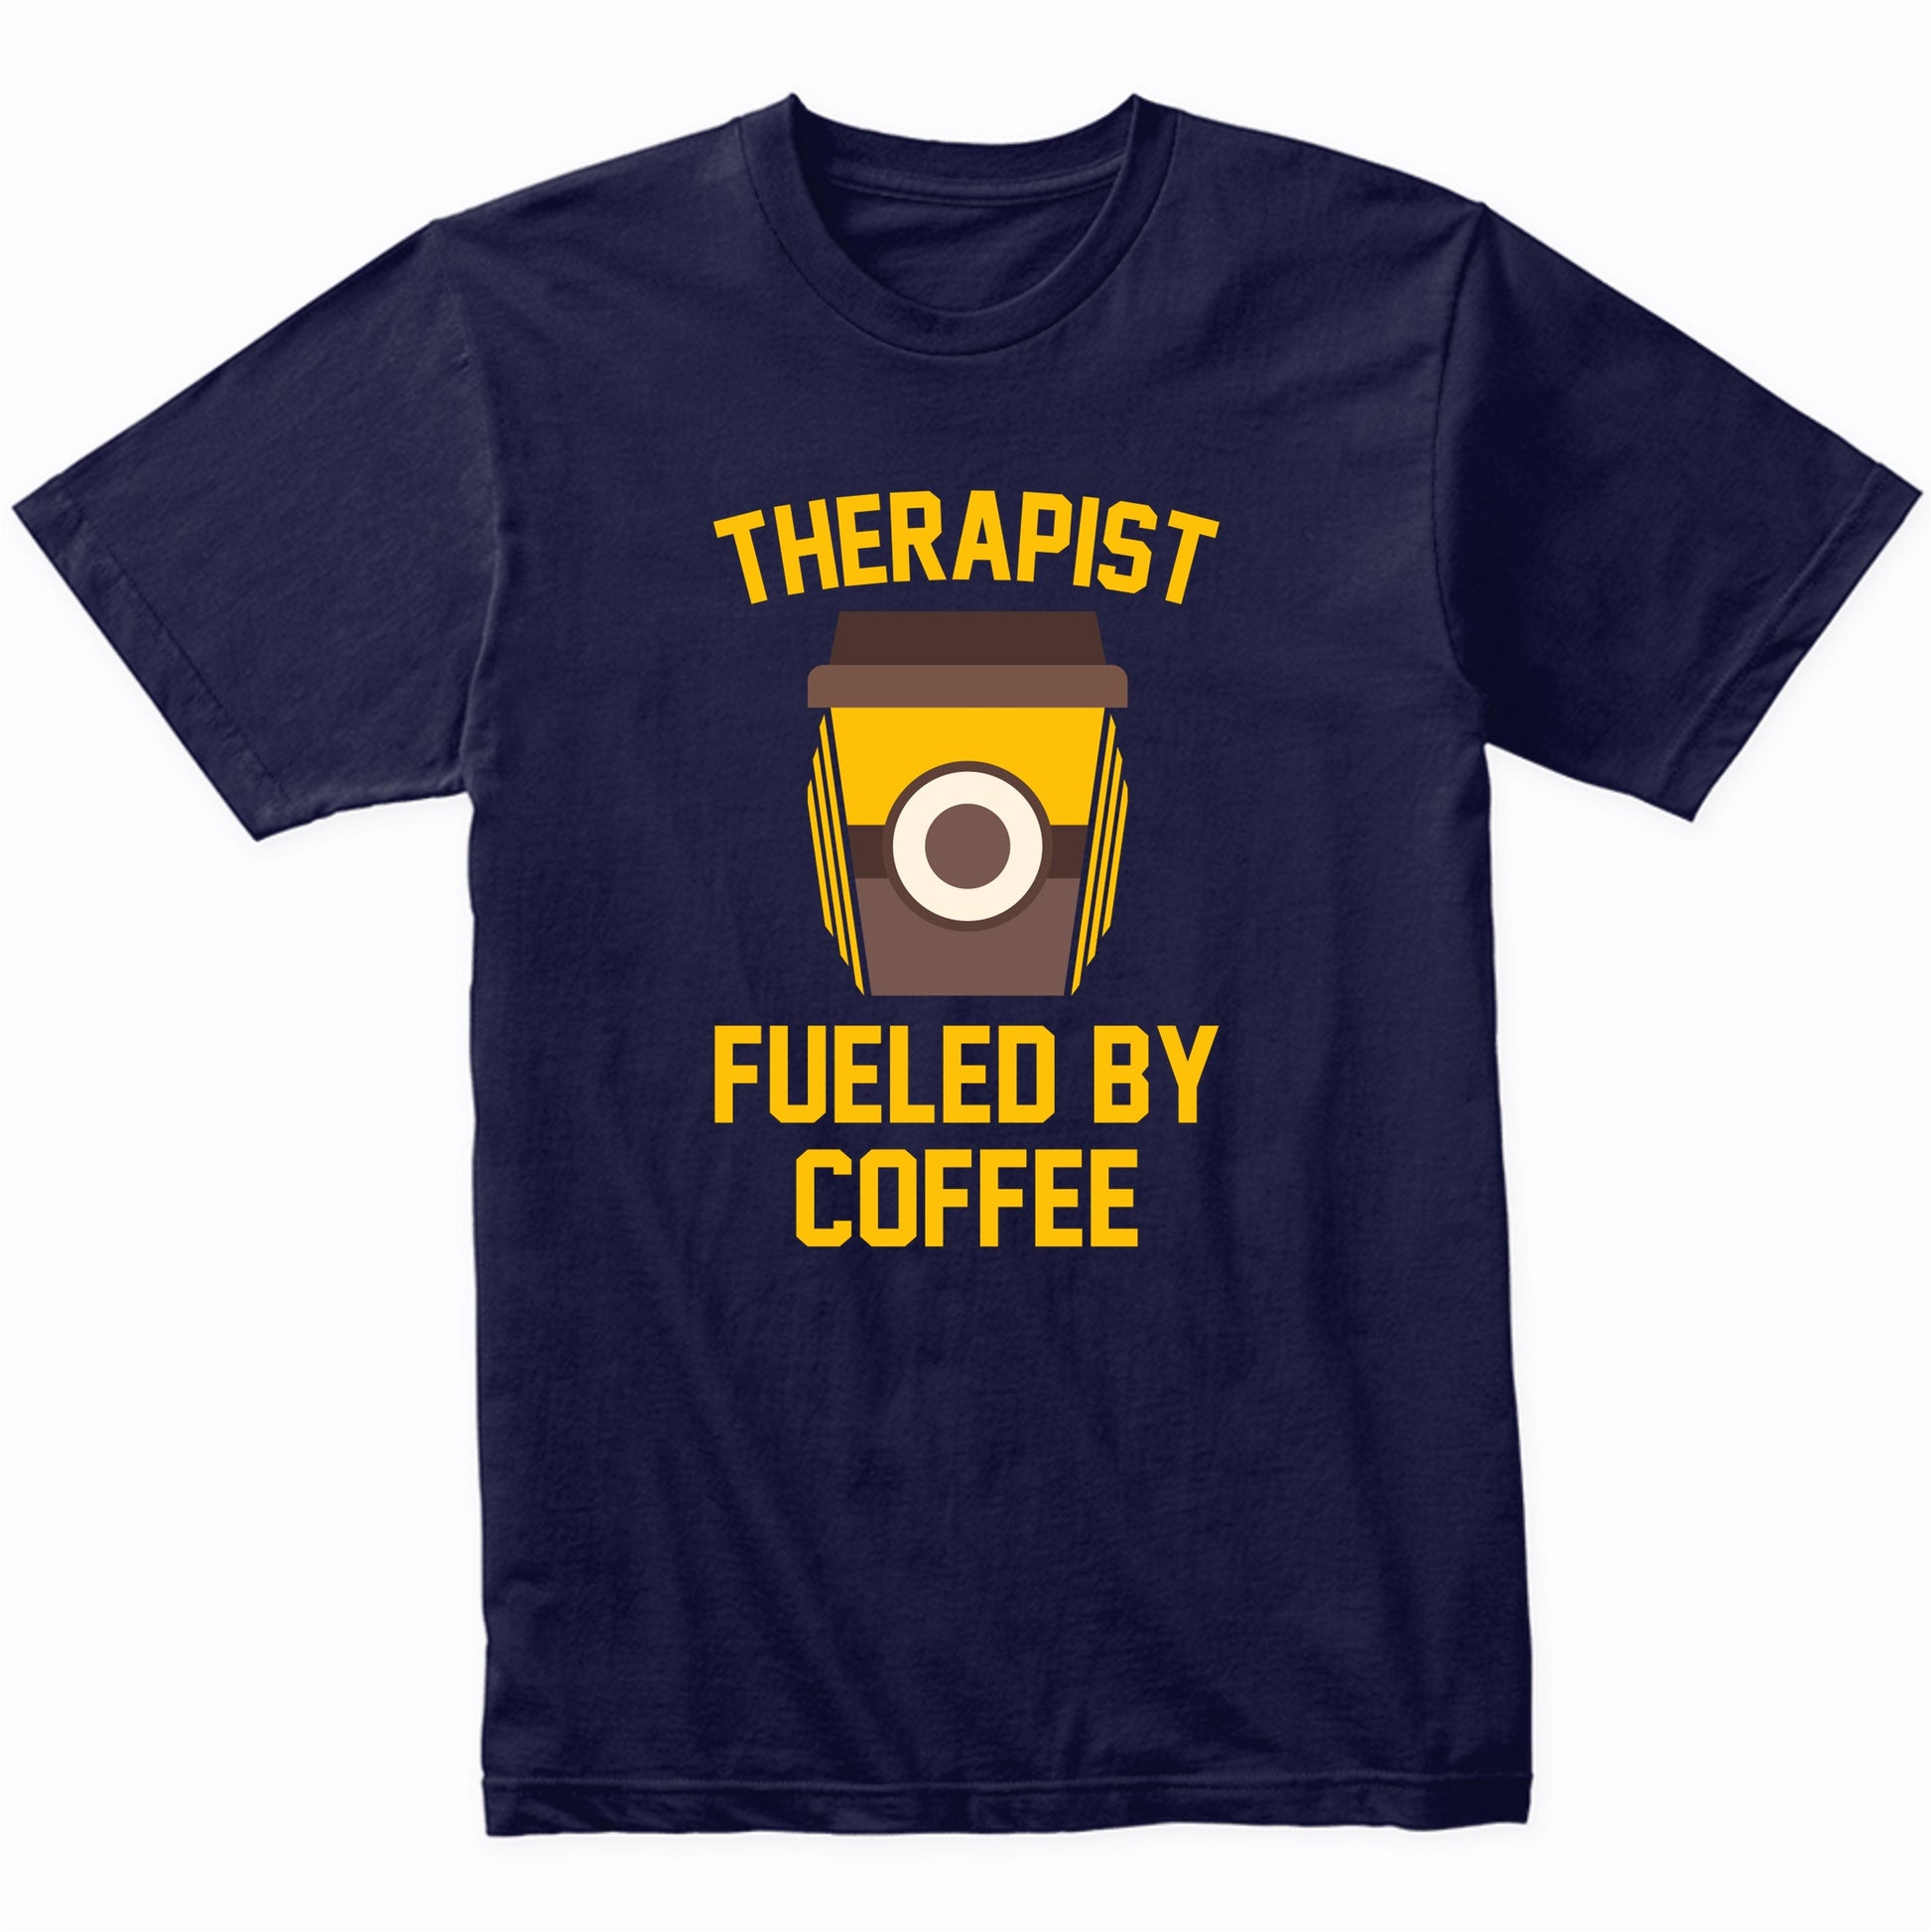 Therapist Fueled By Coffee Funny Shirt